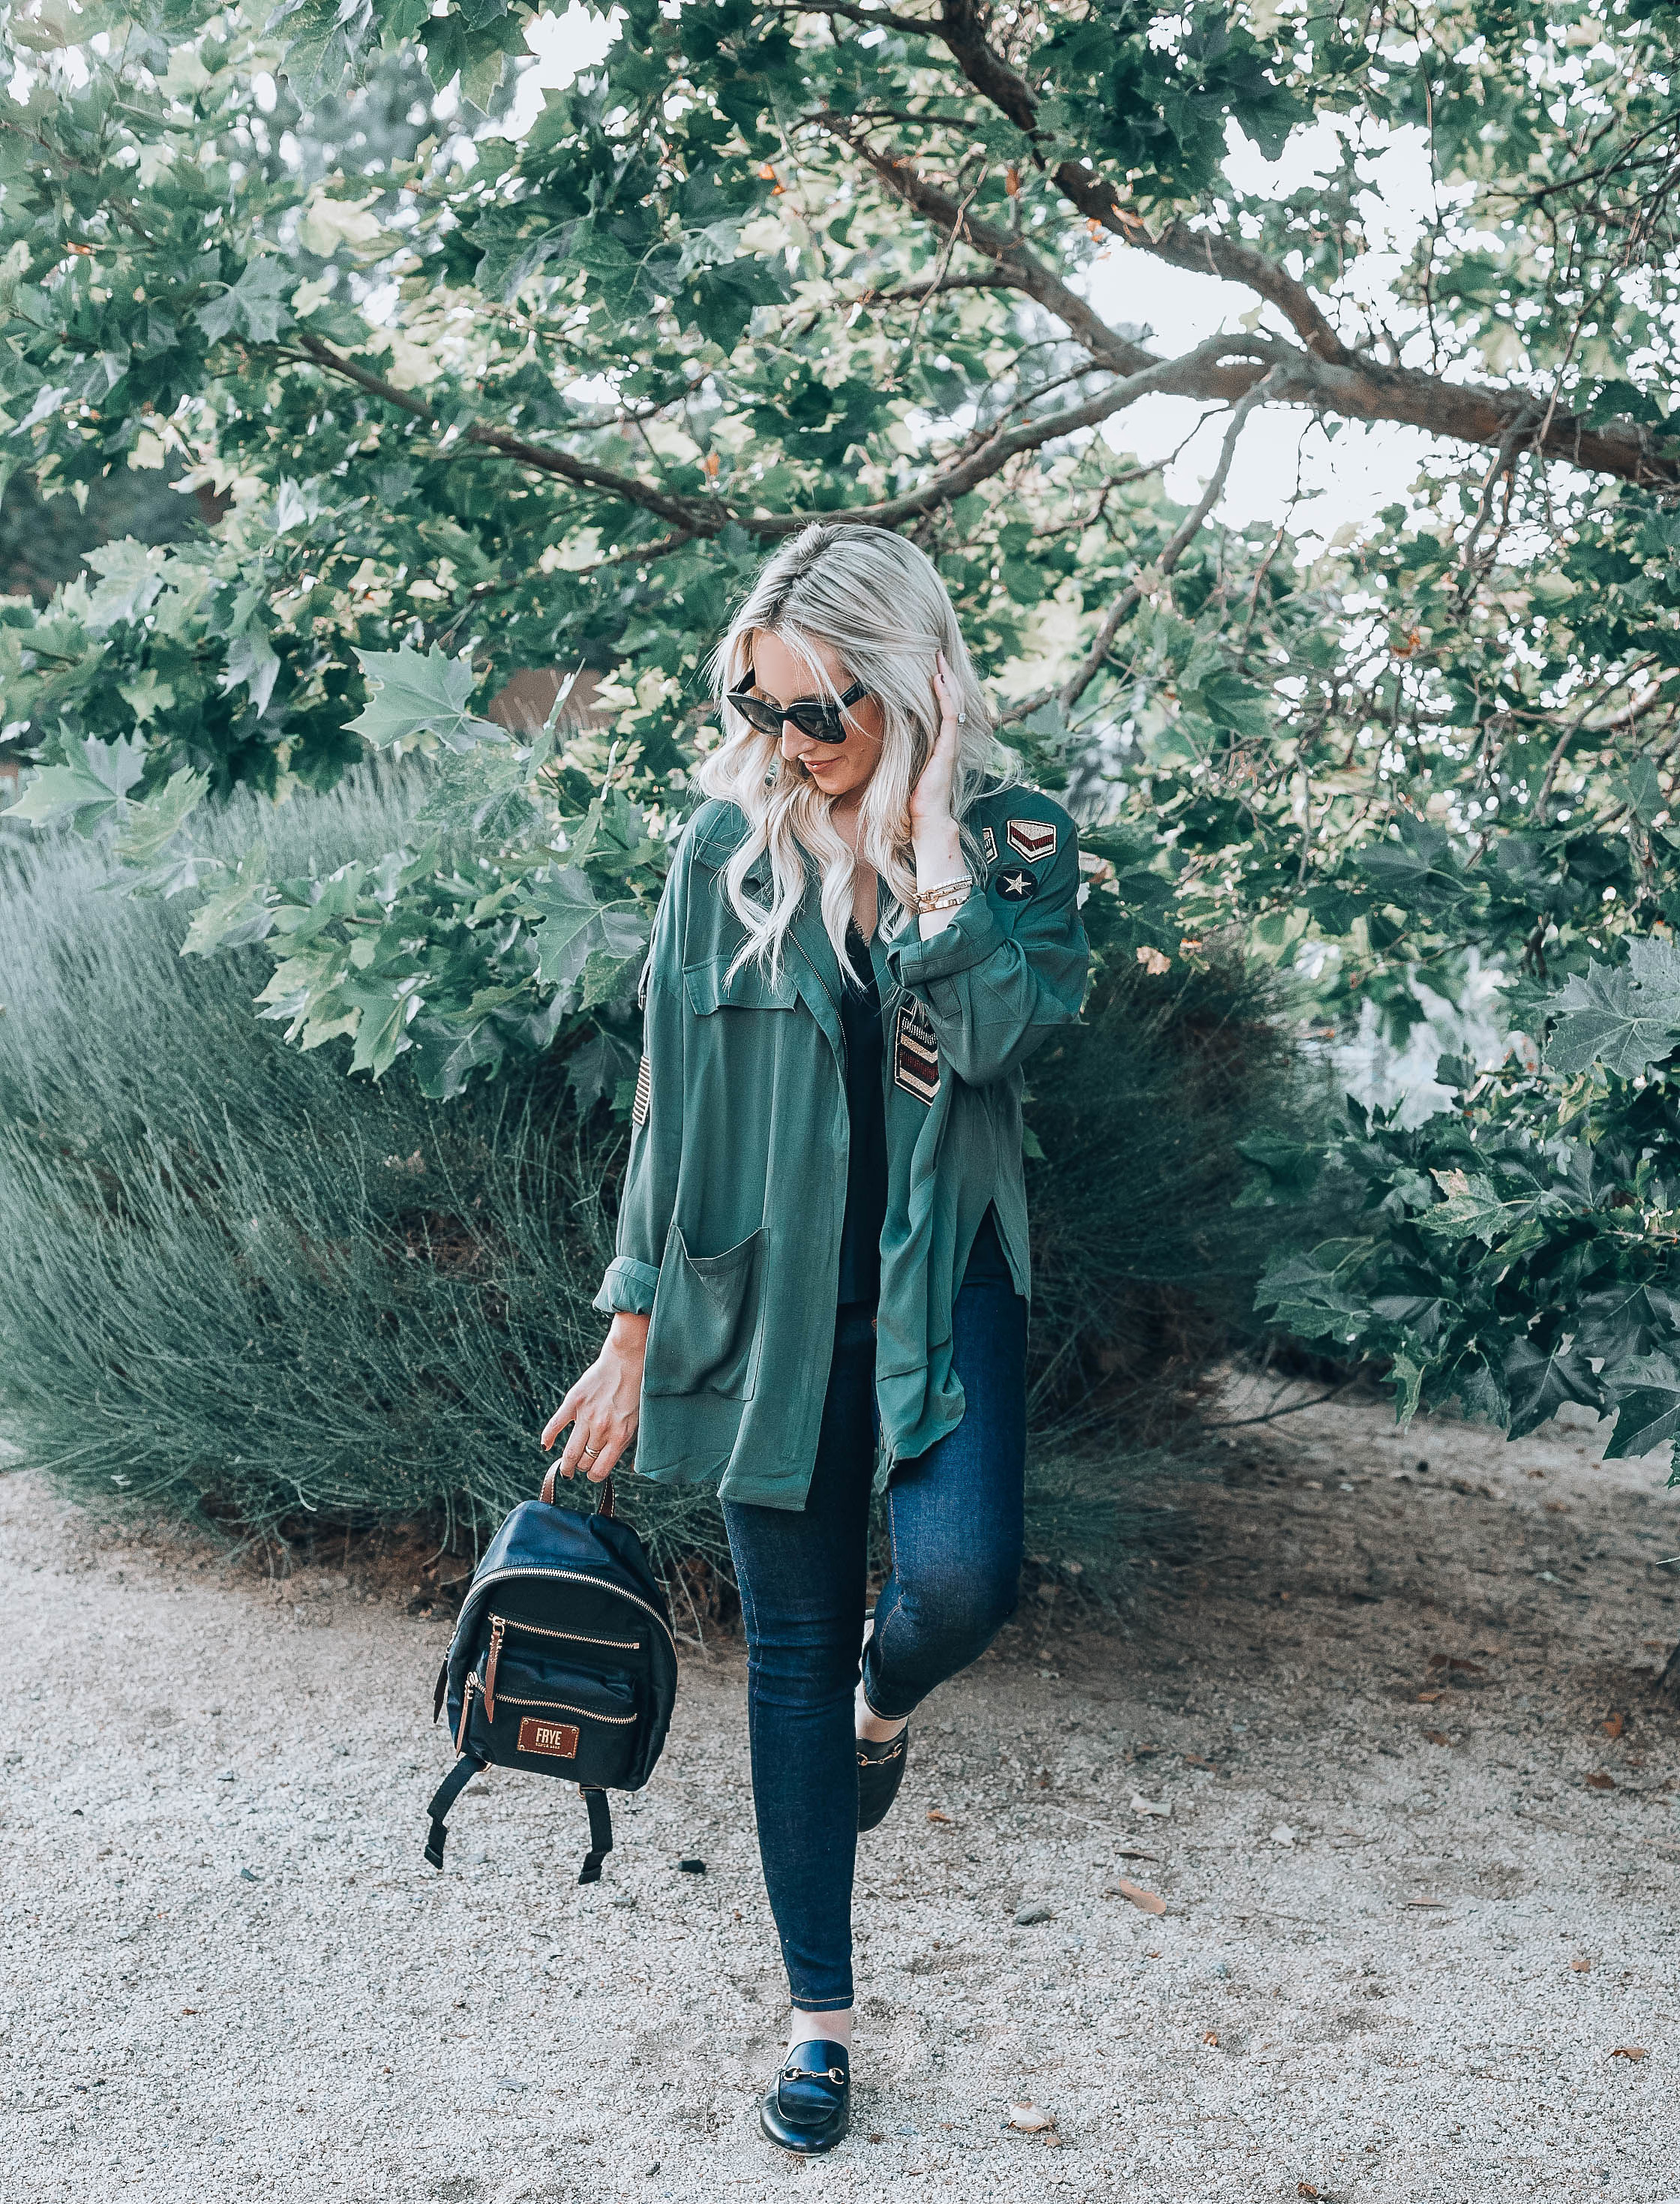 Emily Farren Wieczorek of Two Peas in a Prada talks about how her Frye Backpack helps her get going in the morning.